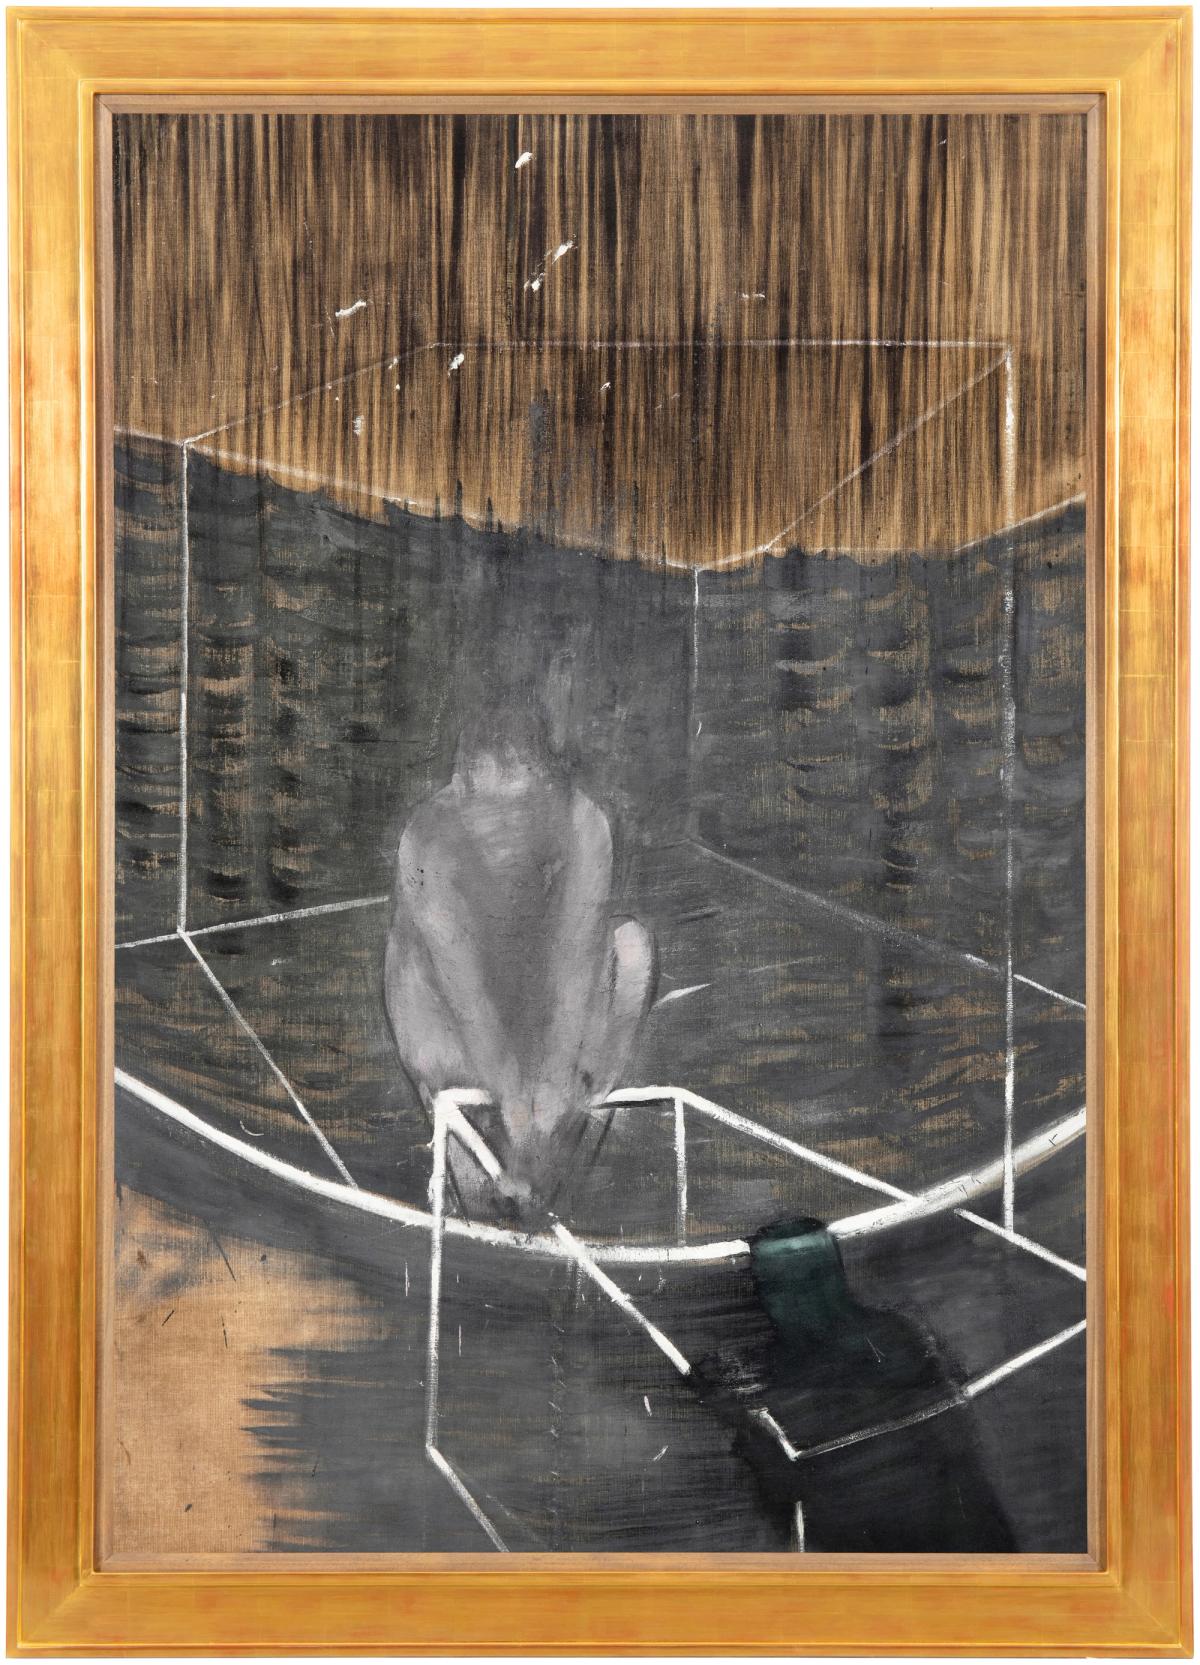 Francis Bacon, Figure Crouching, 1949. Courtesy Sotheby's